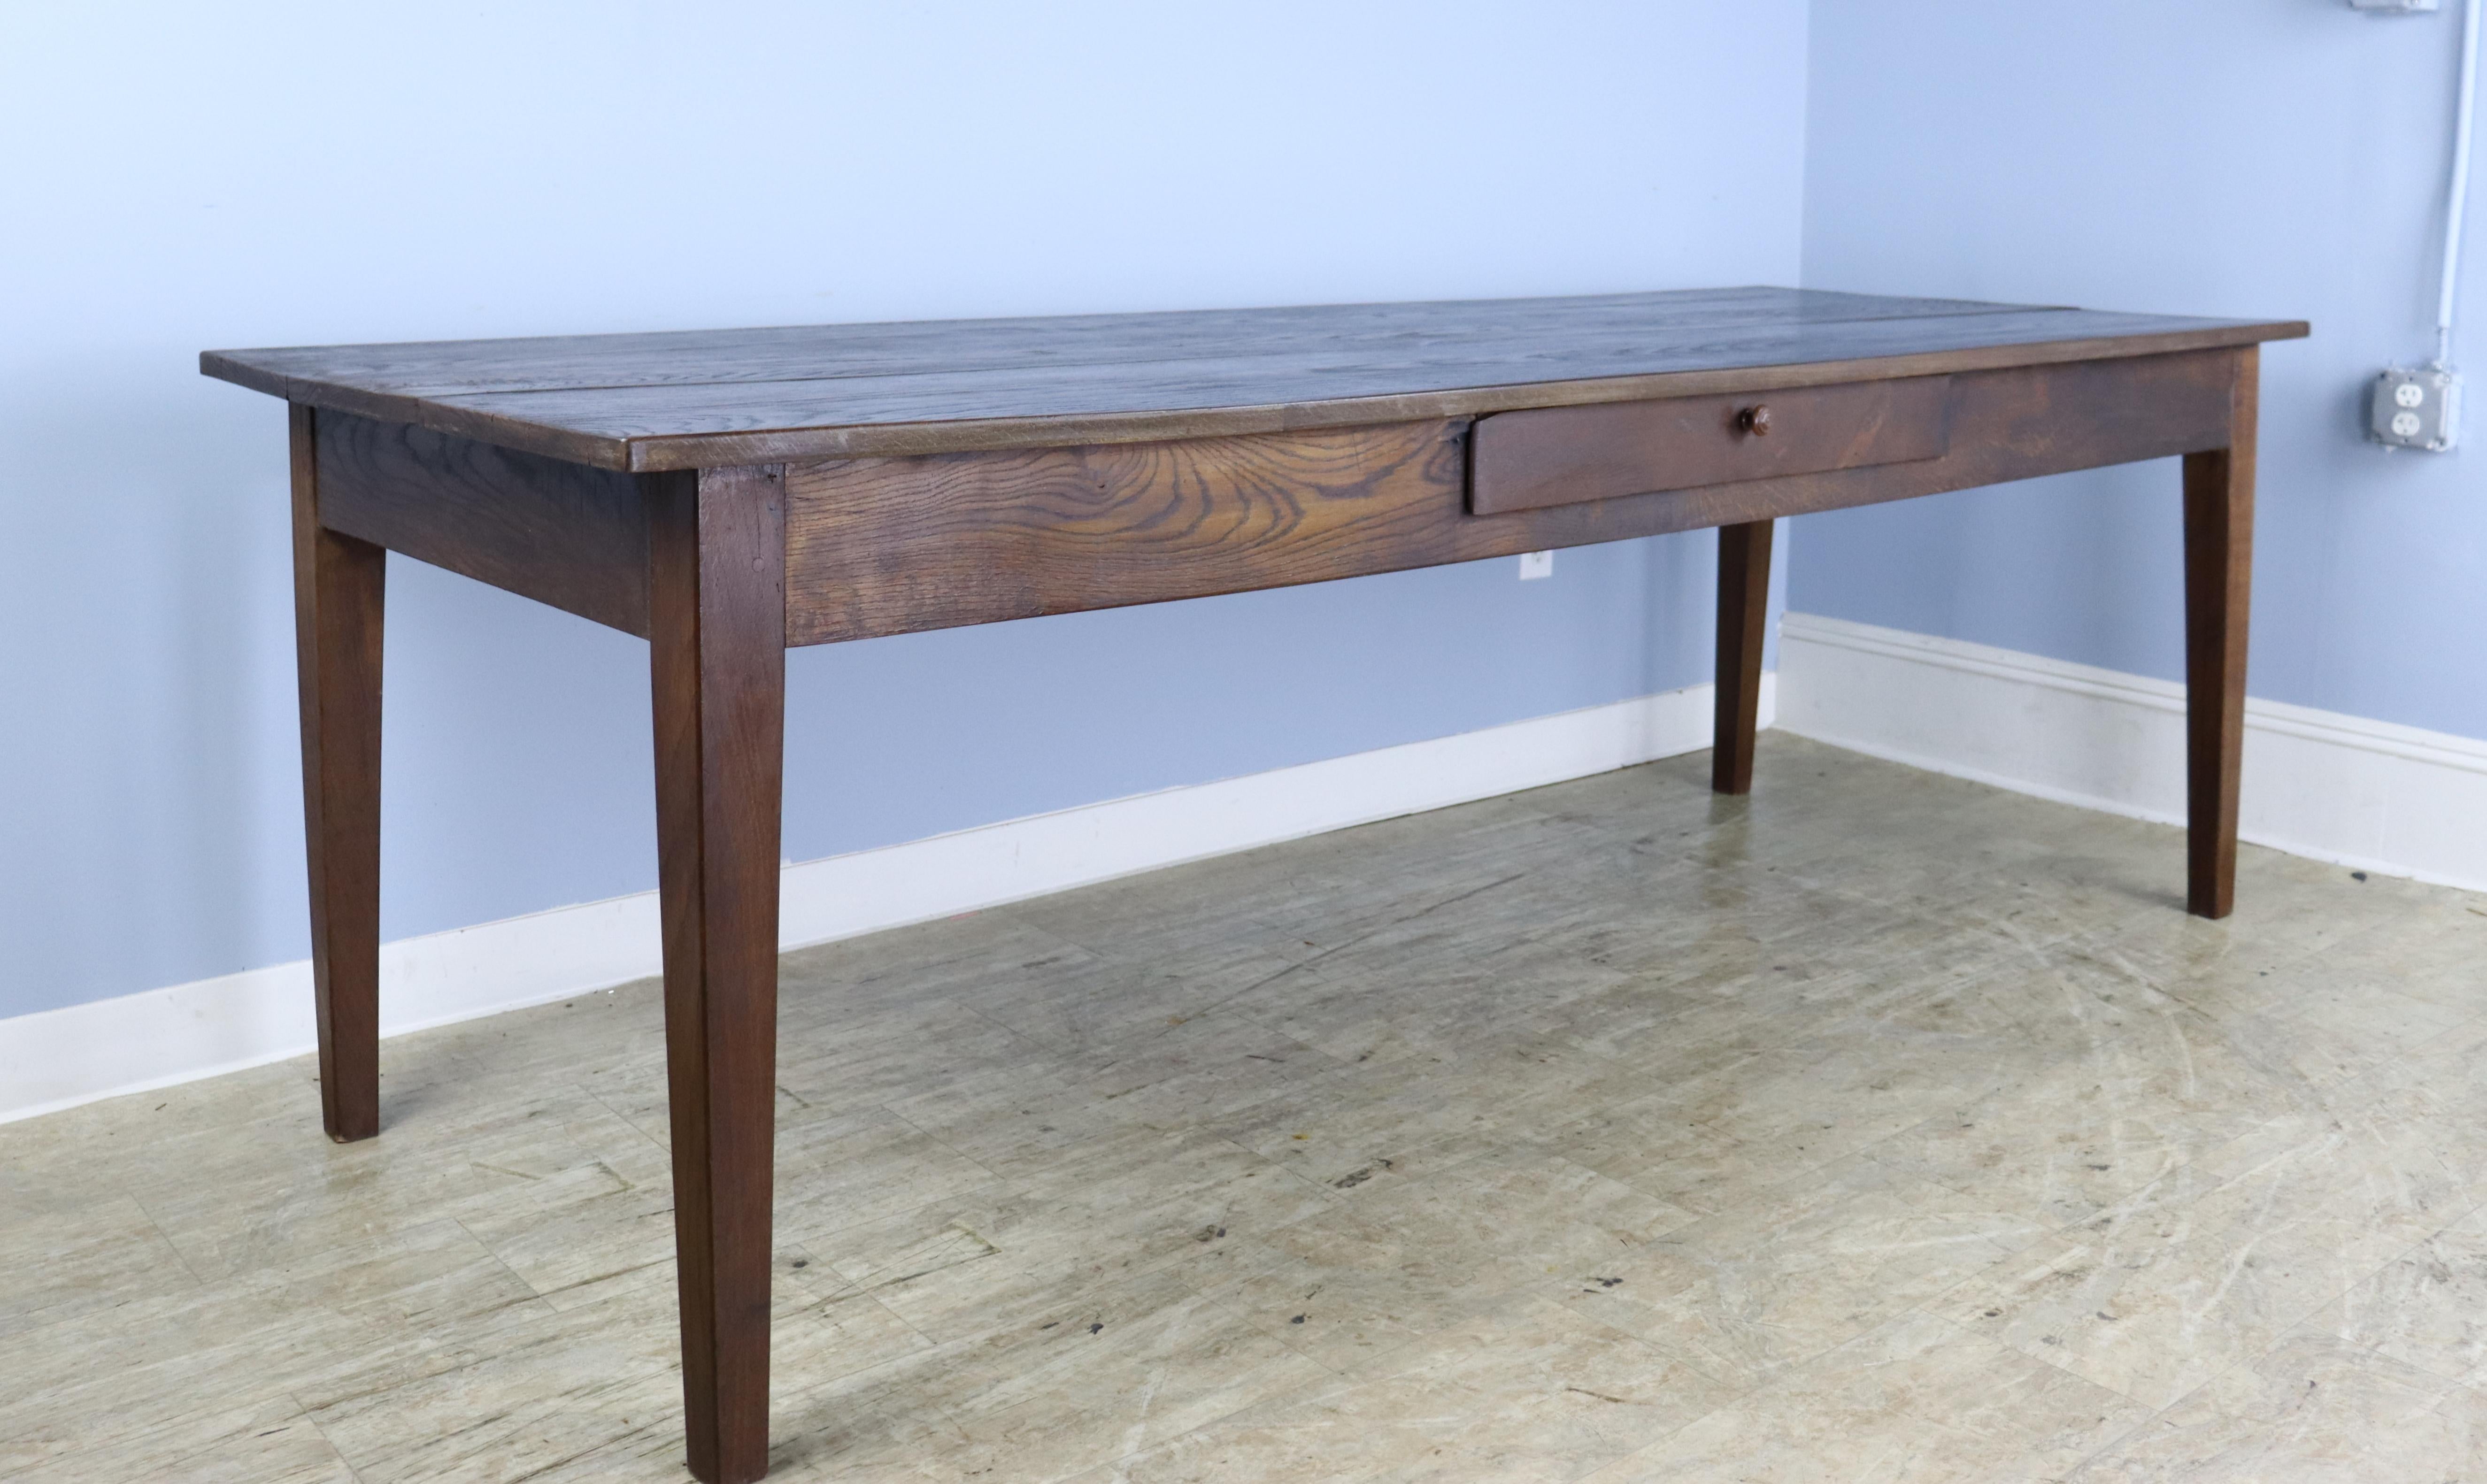 A long French chestnut farm table with a single center drawer.  Well grained top and classic tapered legs. 24.5 inch apron height is good for knees and there are 83 inches between the legs on the long side. The top has good color, grain and patina. 